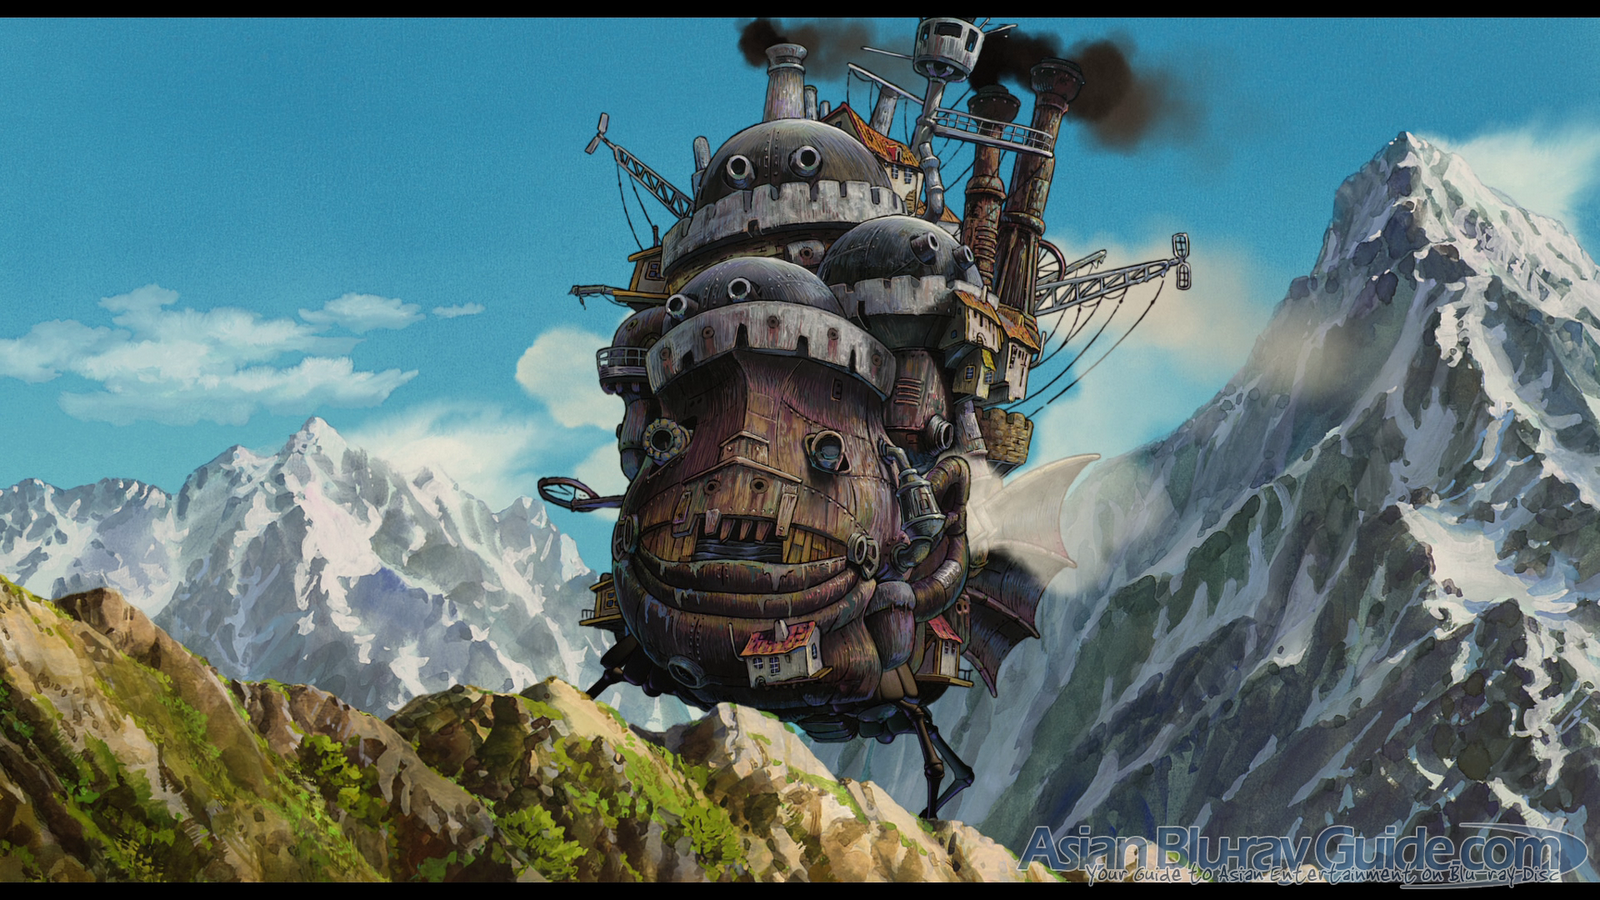 howls moving castle movie visuals